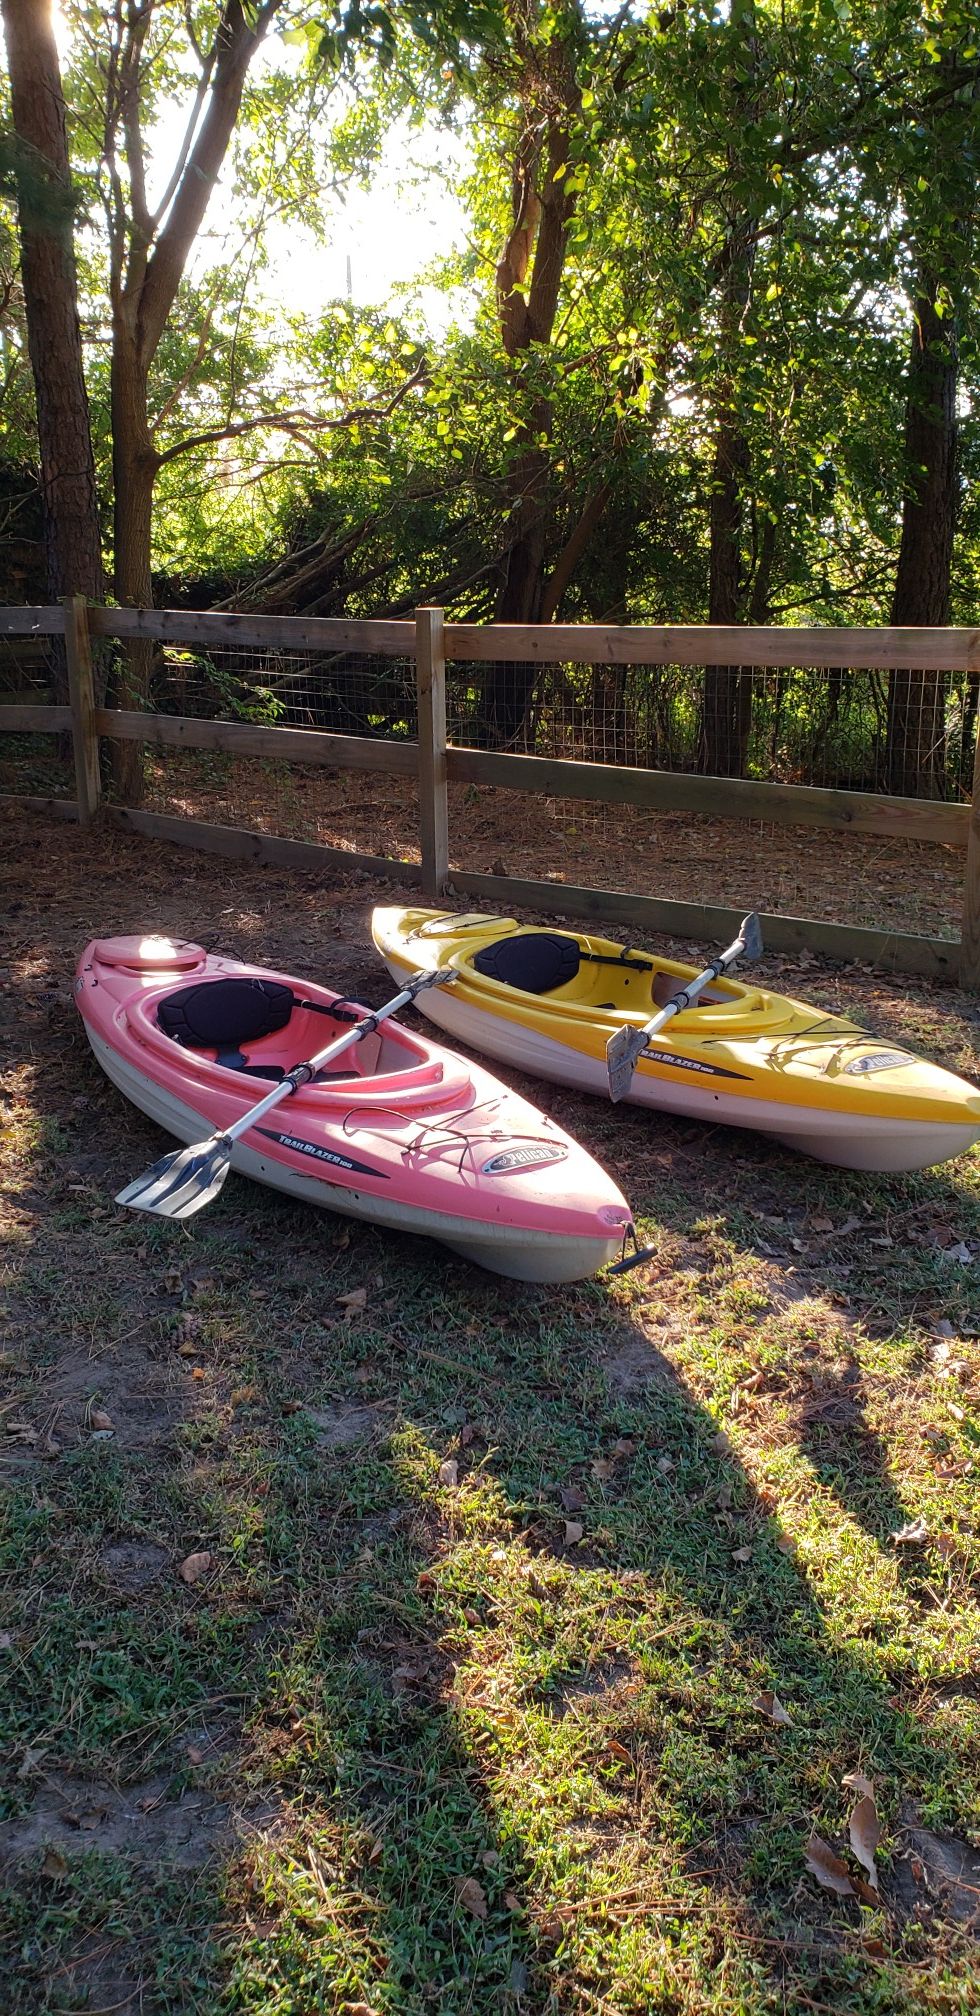 2 kayaks with paddles and life jackets